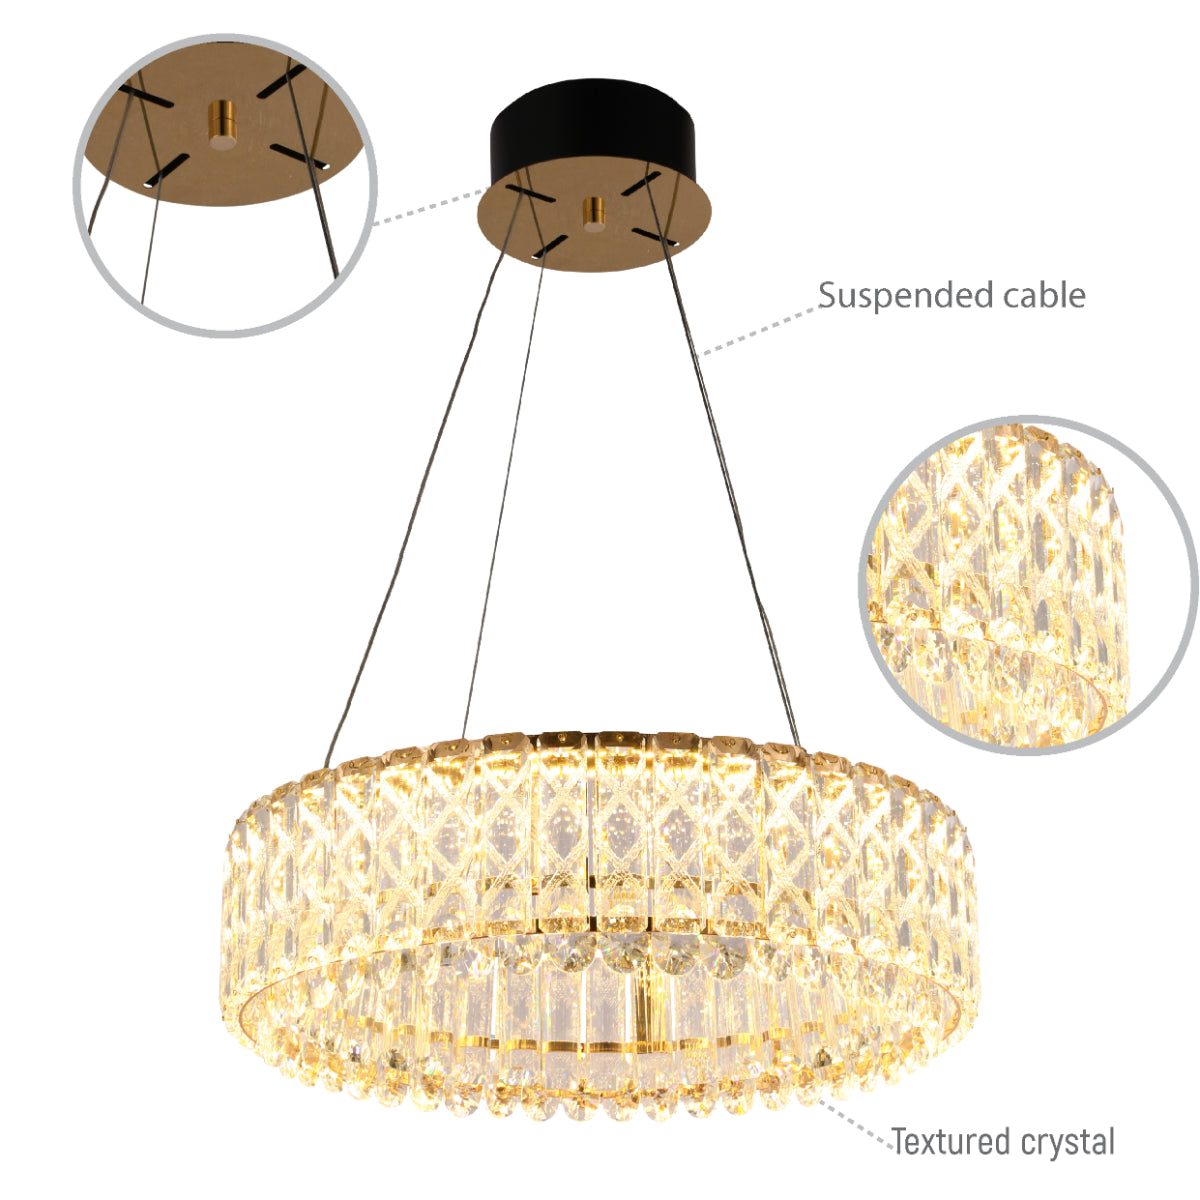 Lighting properties of Crystal Gold Pendant Chandelier Light with Remote Control 159-18215